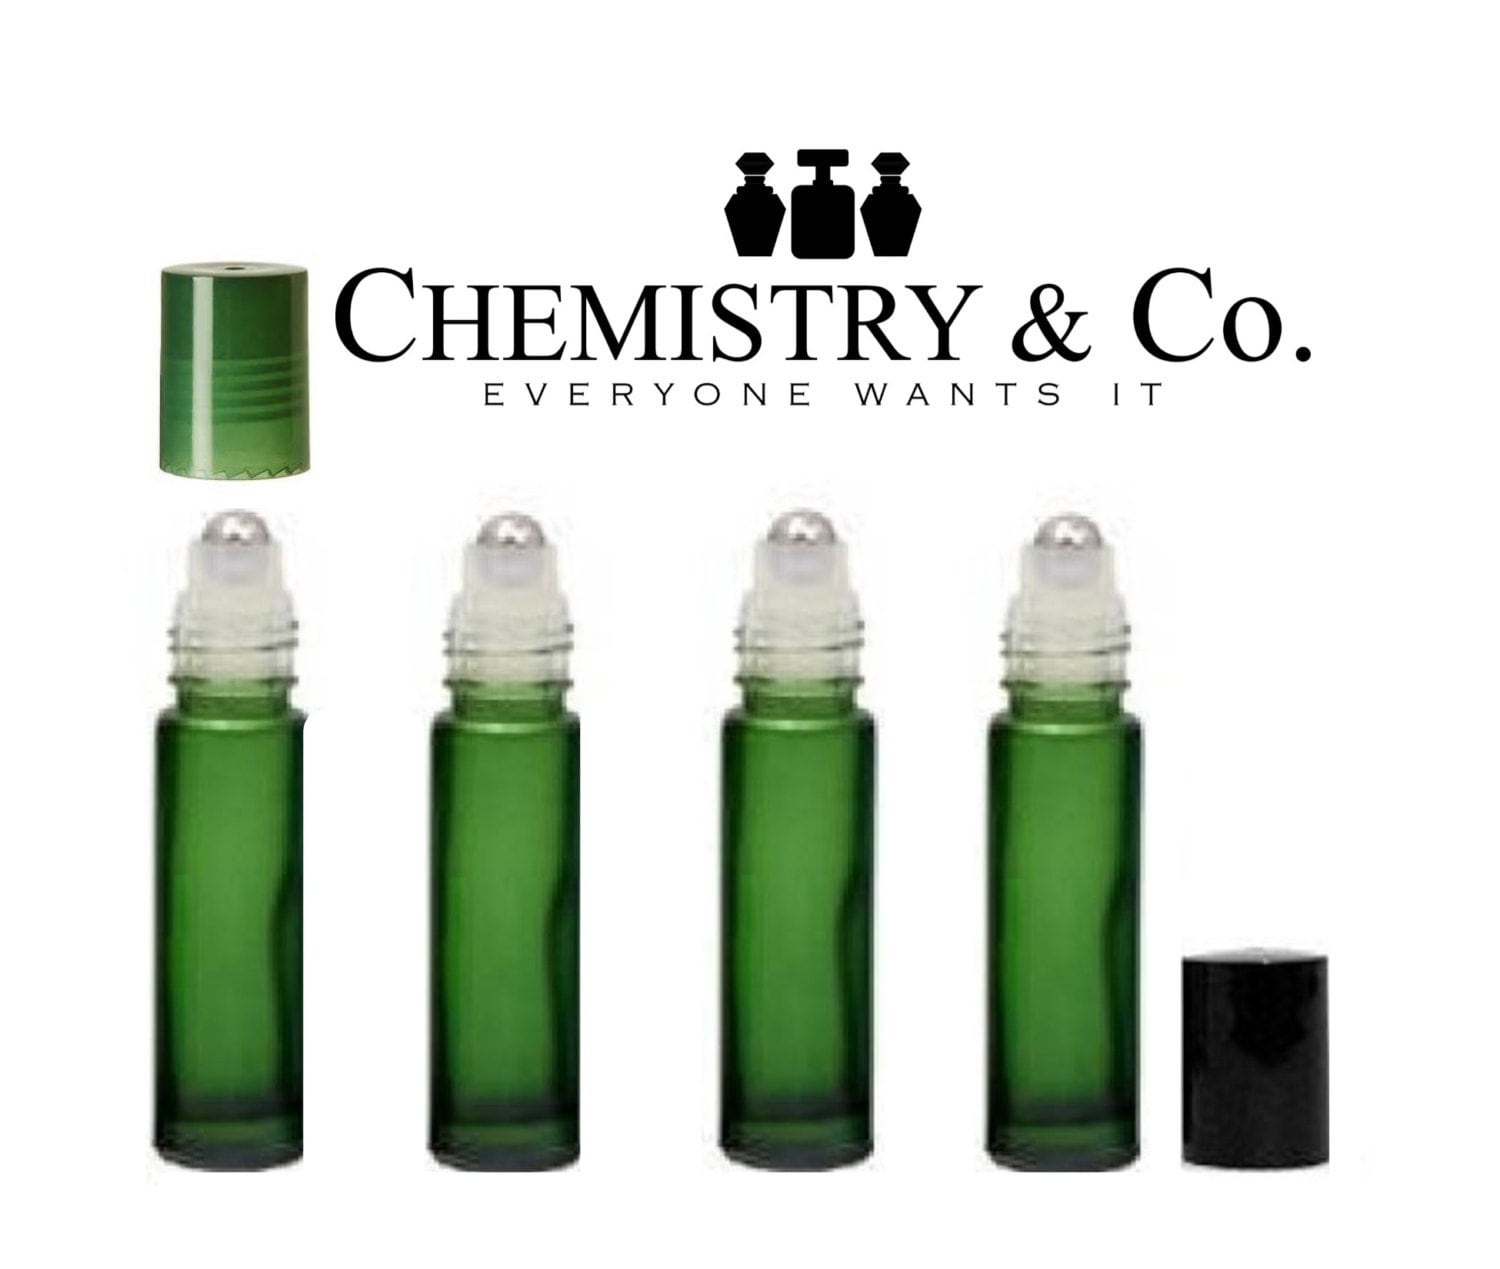 Download 3 GREEN Frosted Glass Roll On Bottles w/ STAINLESS by ChemistryCo